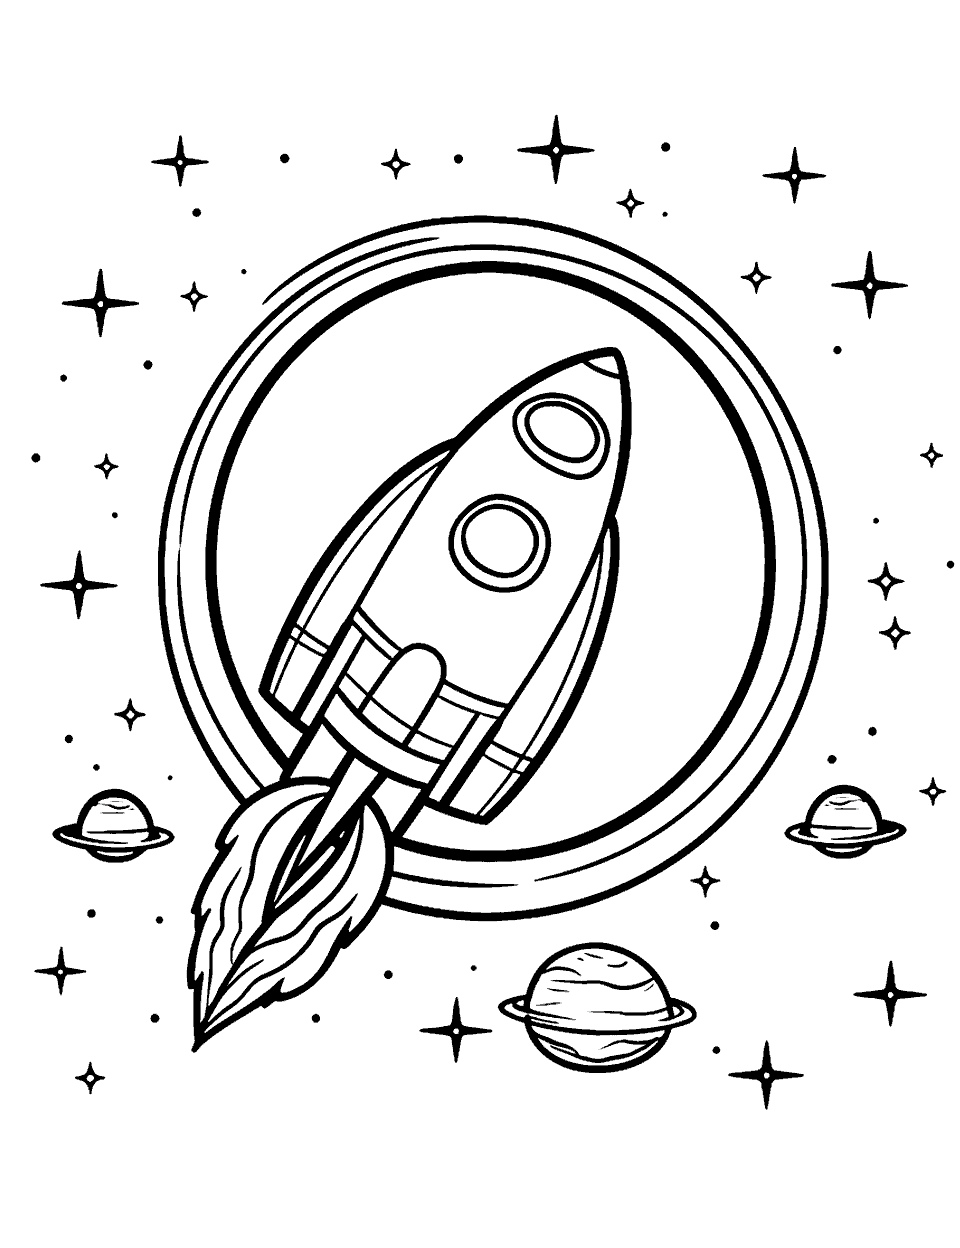 Rocket to Mars Solar System Coloring Page - A rocket on its way to Mars.